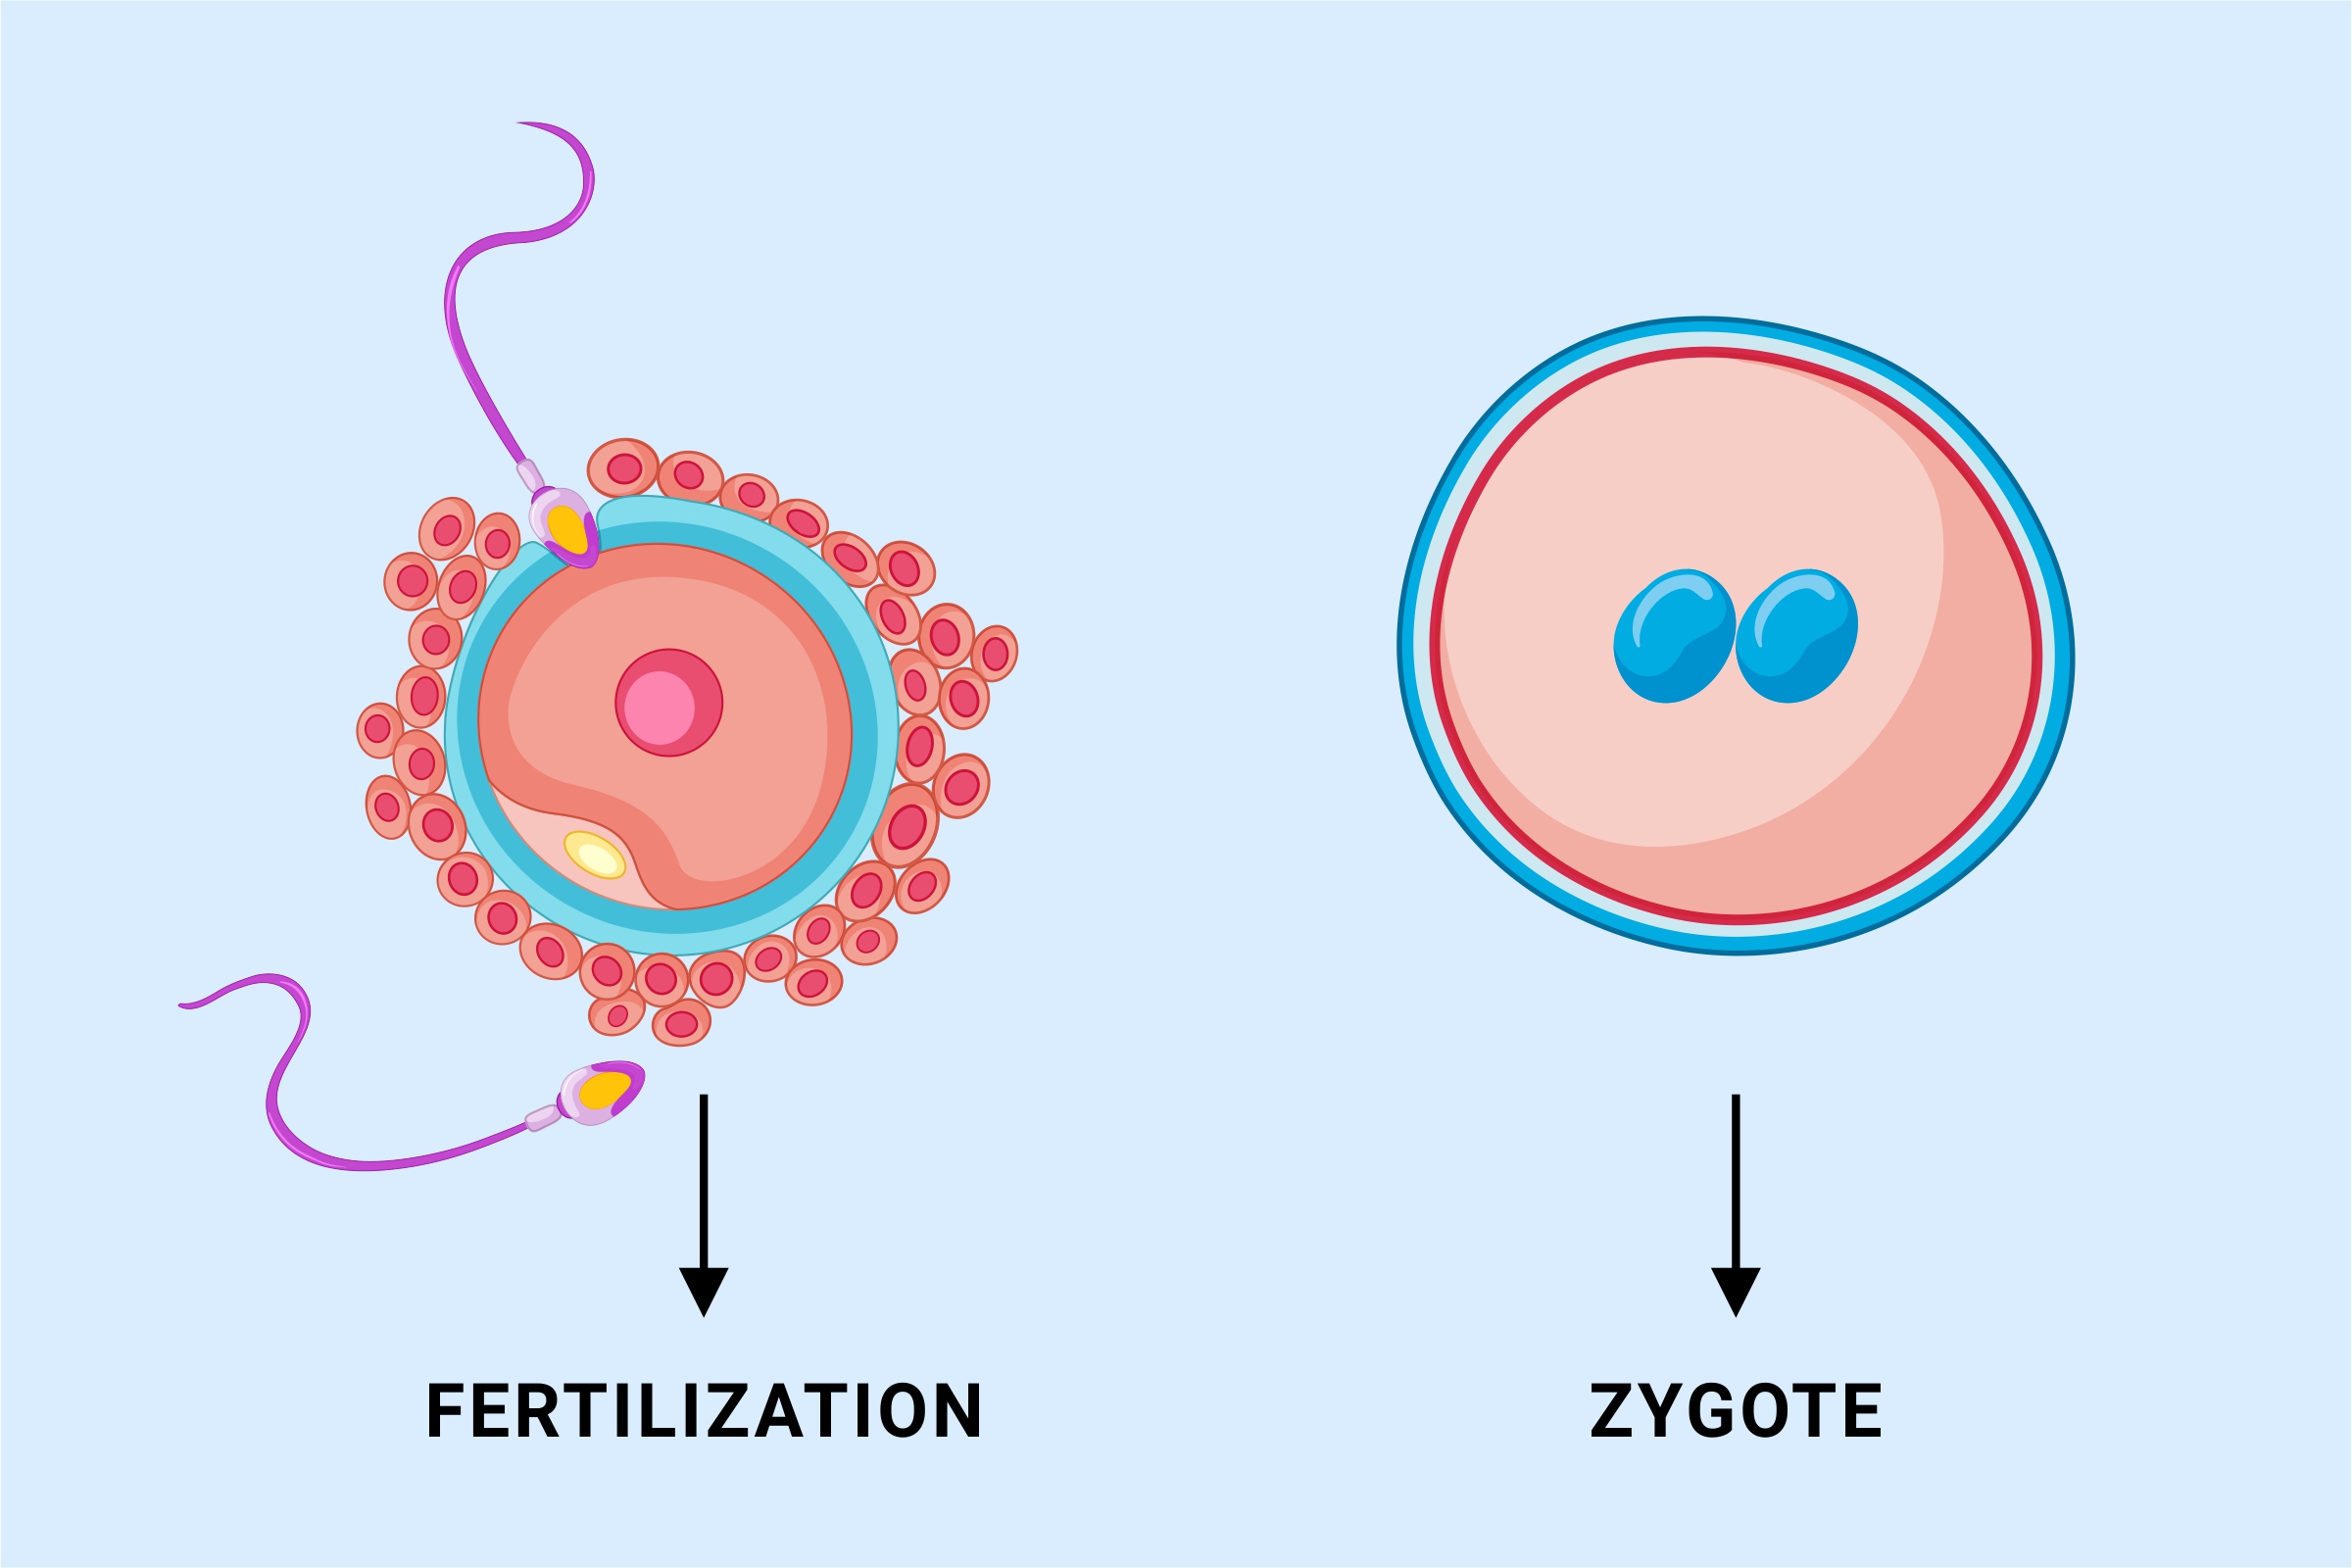 WHAT IS A ZYGOTE IN BIOLOGY